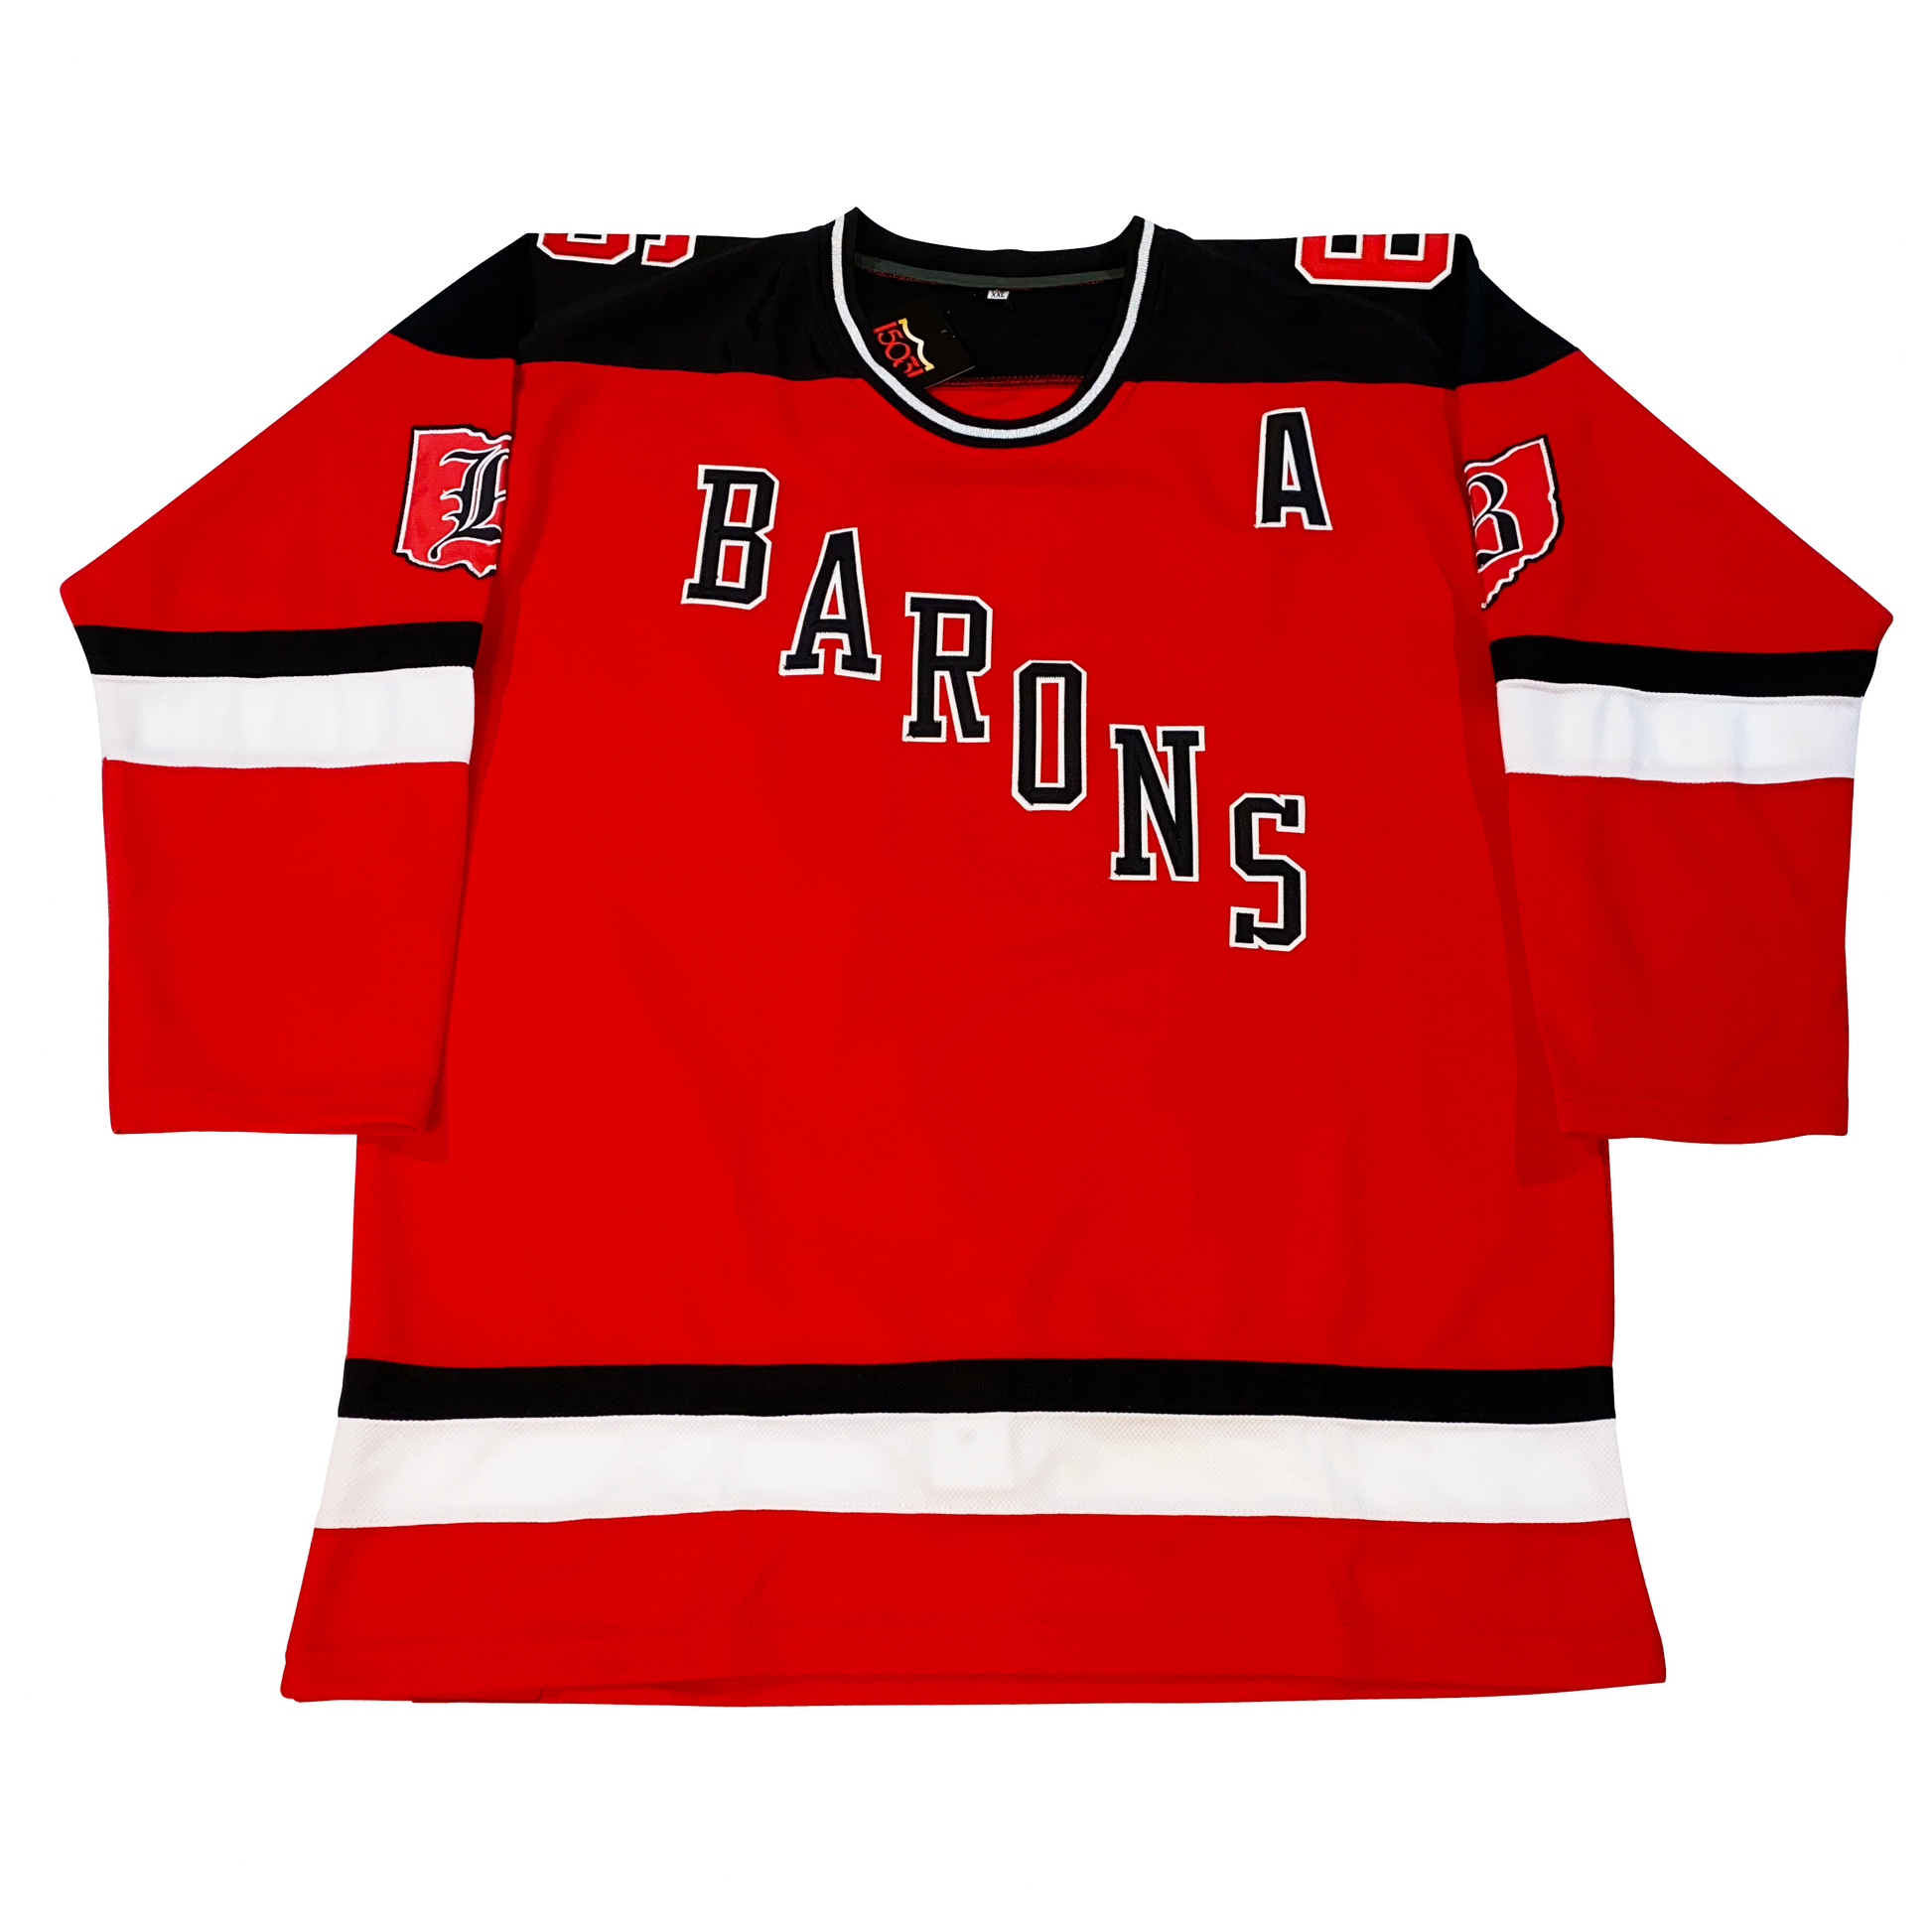 27 Gilles Meloche Jersey Cleveland Barons Hockey Jersey White Red All  Stitched Jersey Fast From Felixtrading, $22.8